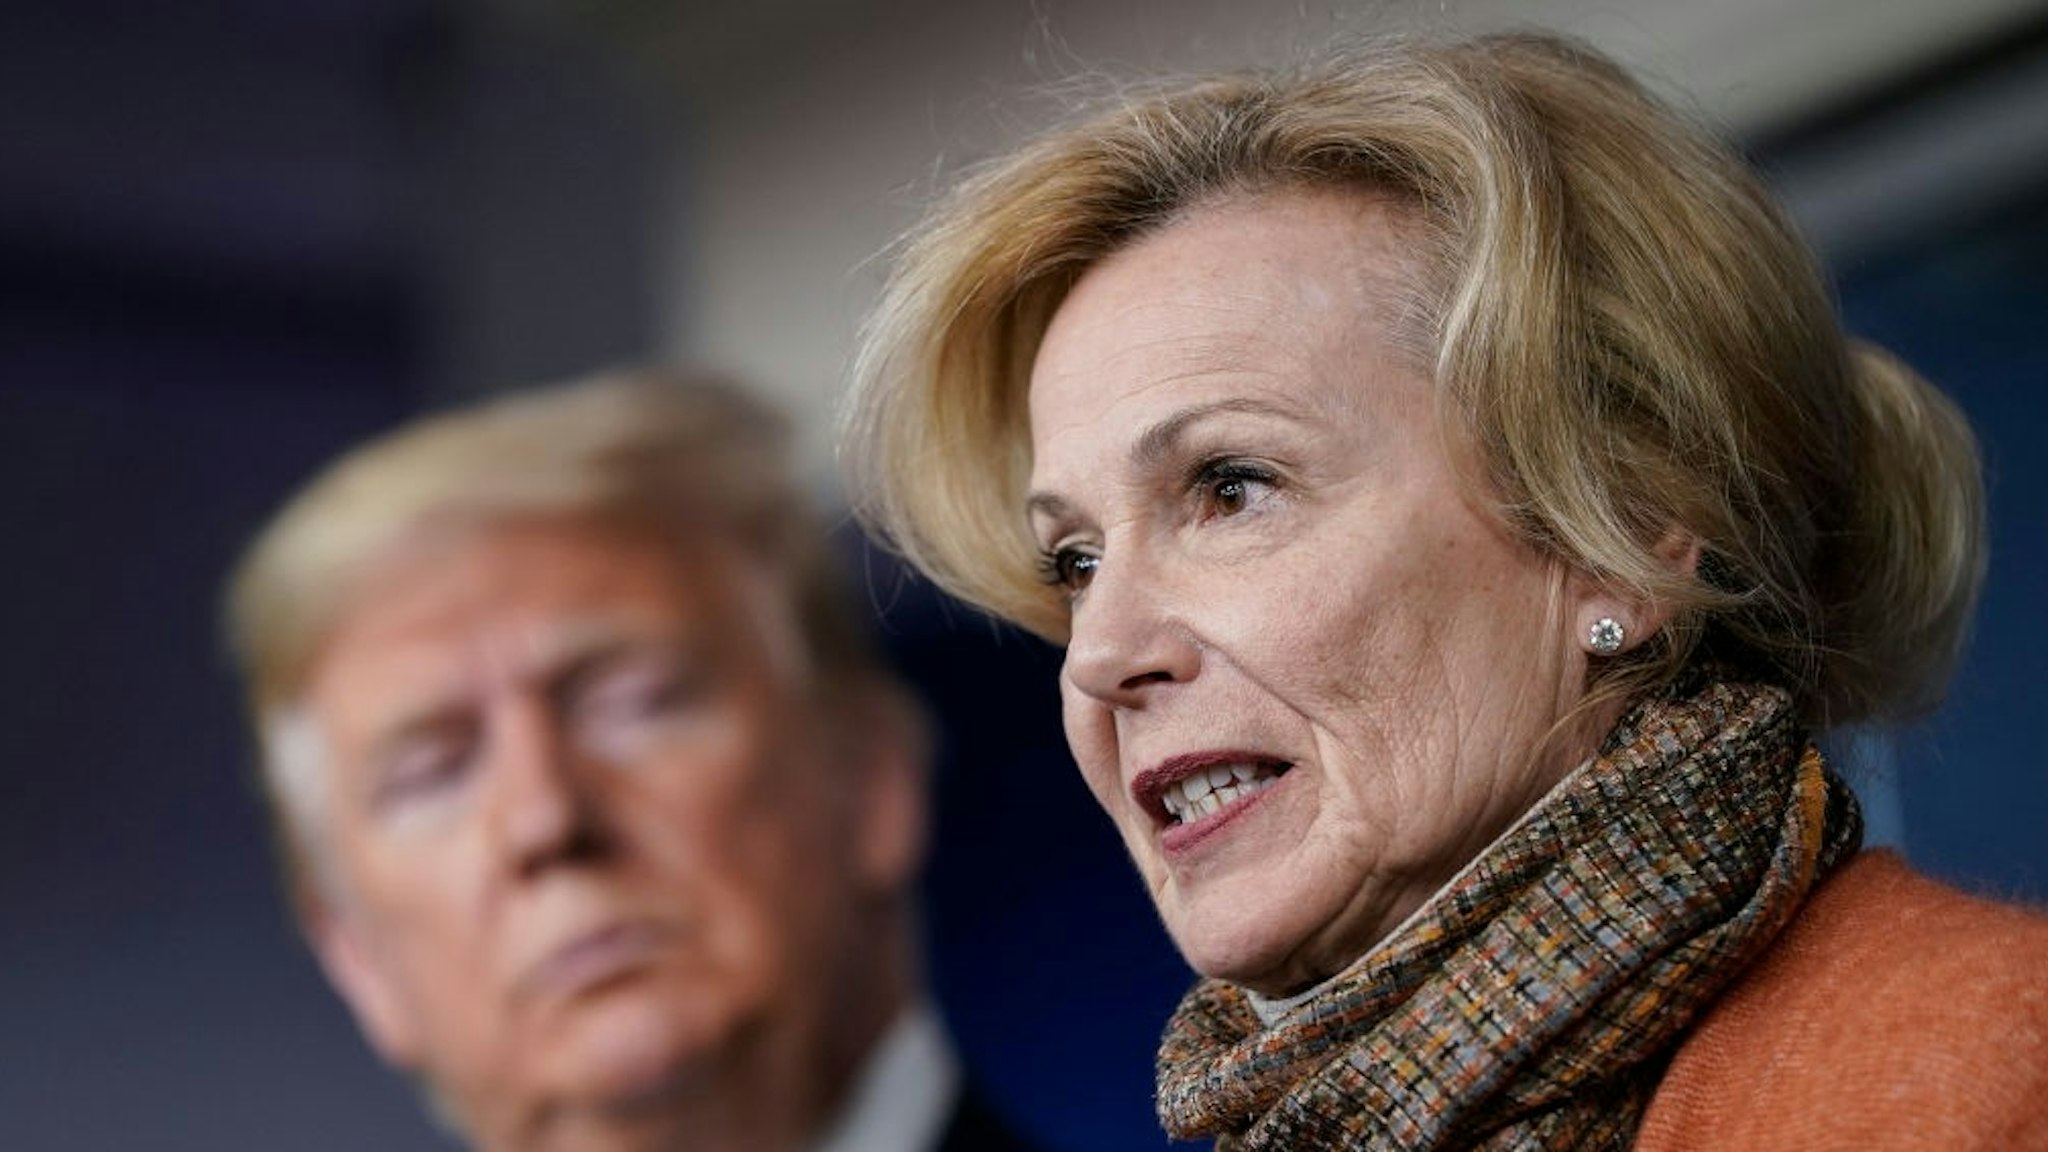 WASHINGTON, DC - MARCH 17: (L-R) U.S. President Donald Trump looks on as White House Coronavirus Response Coordinator Dr. Deborah Birx speaks about the coronavirus outbreak in the press briefing room at the White House on March 17, 2020 in Washington, DC. The Trump administration is considering an $850 billion stimulus package to counter the economic fallout as the coronavirus spreads. (Photo by